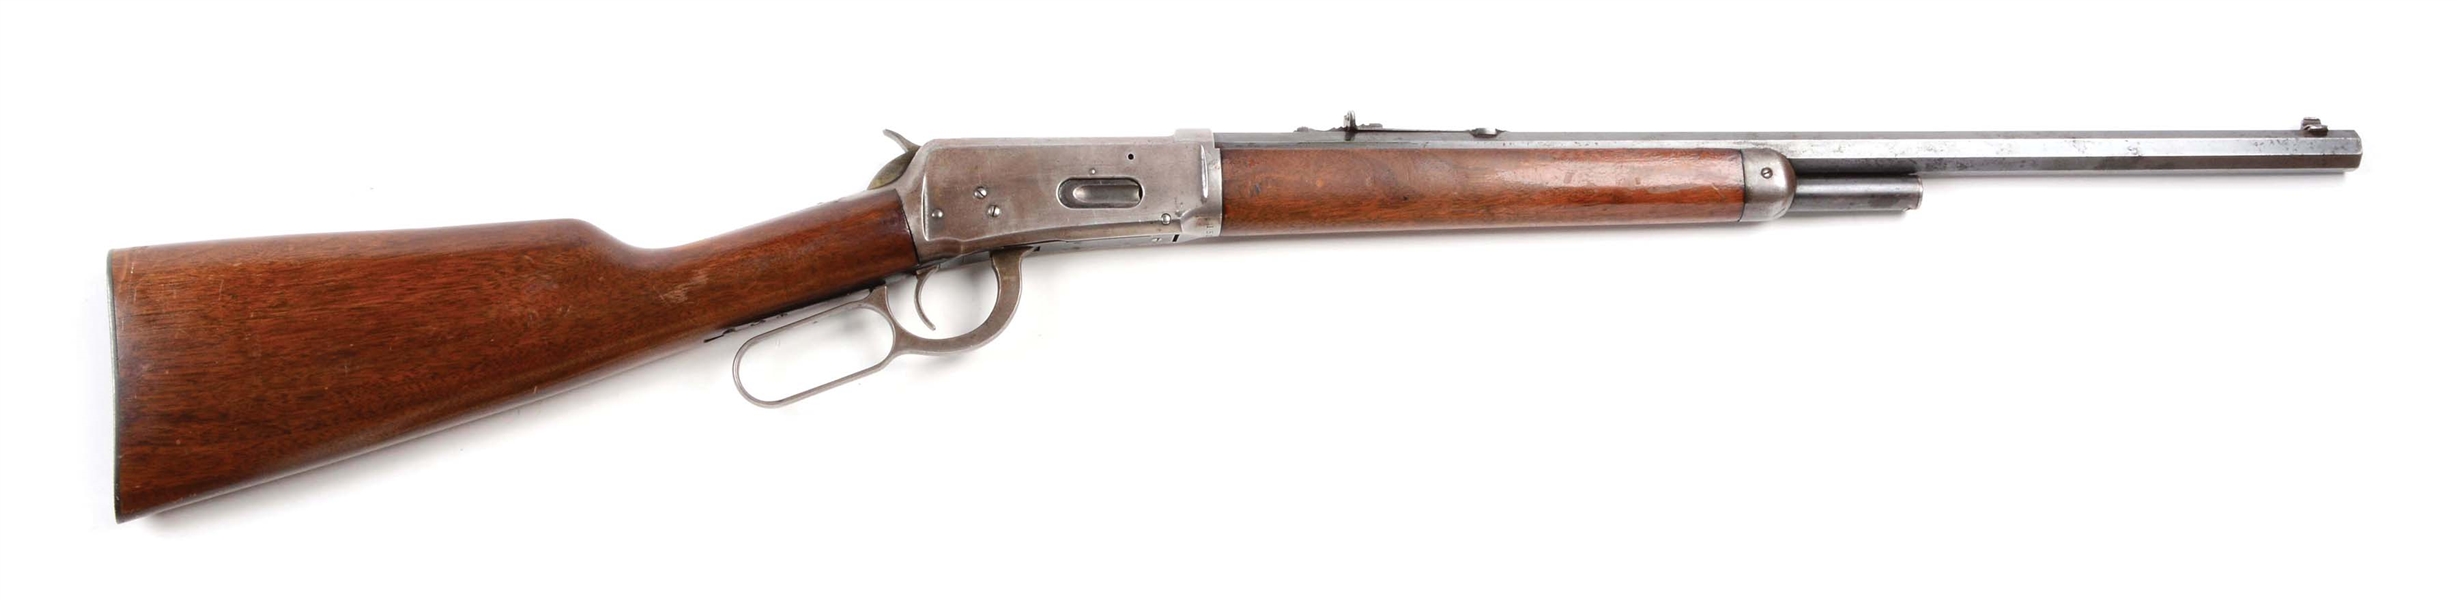 (C) WINCHESTER MODEL 1894 LEVER ACTION RIFLE (1899).